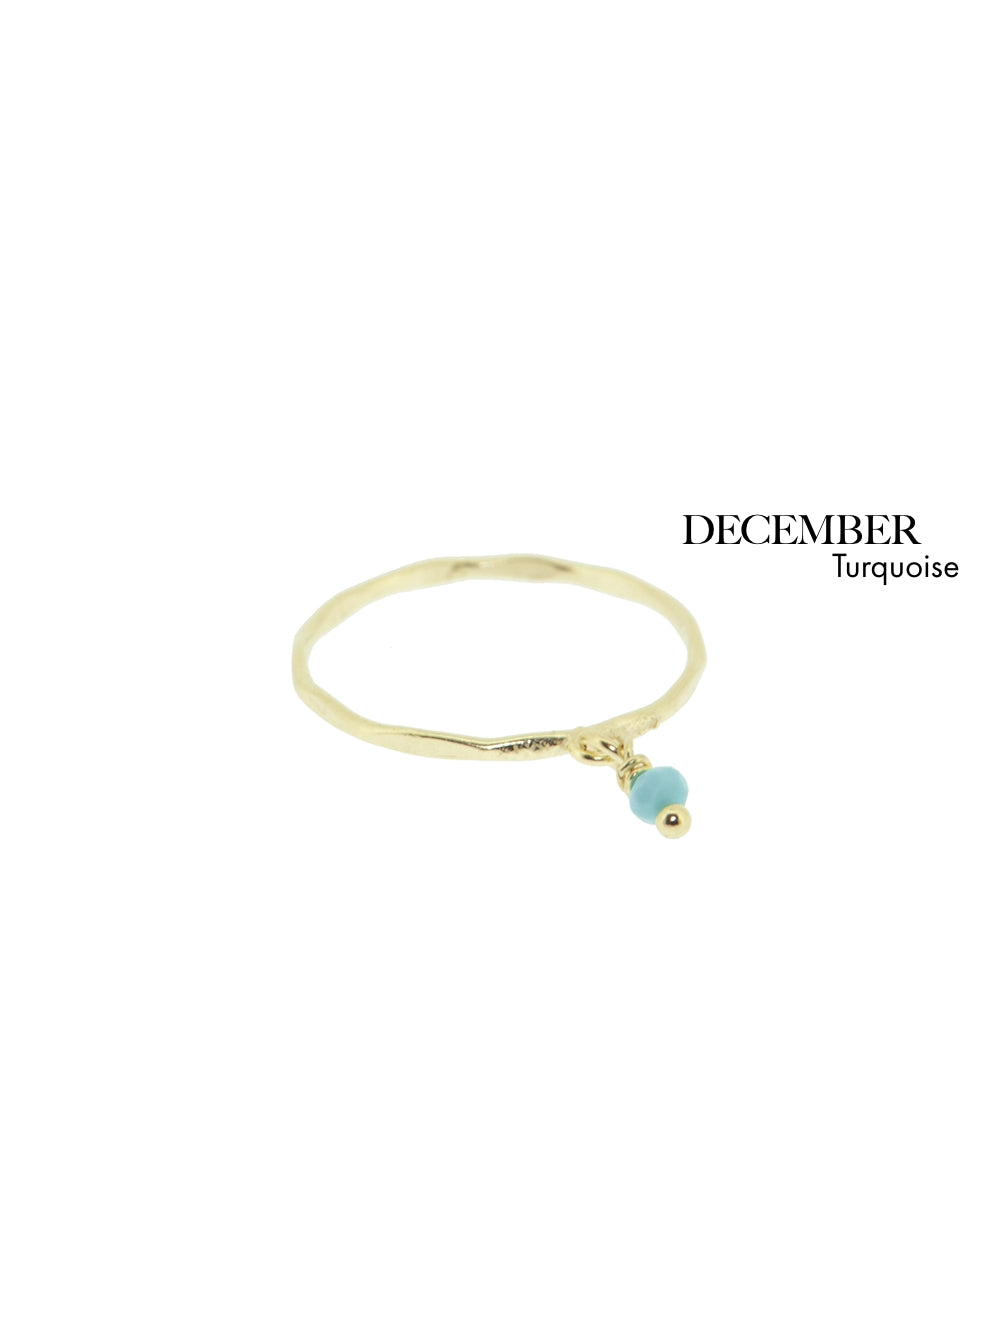 Birthstone ring December - Turquoise | 14K Gold Plated